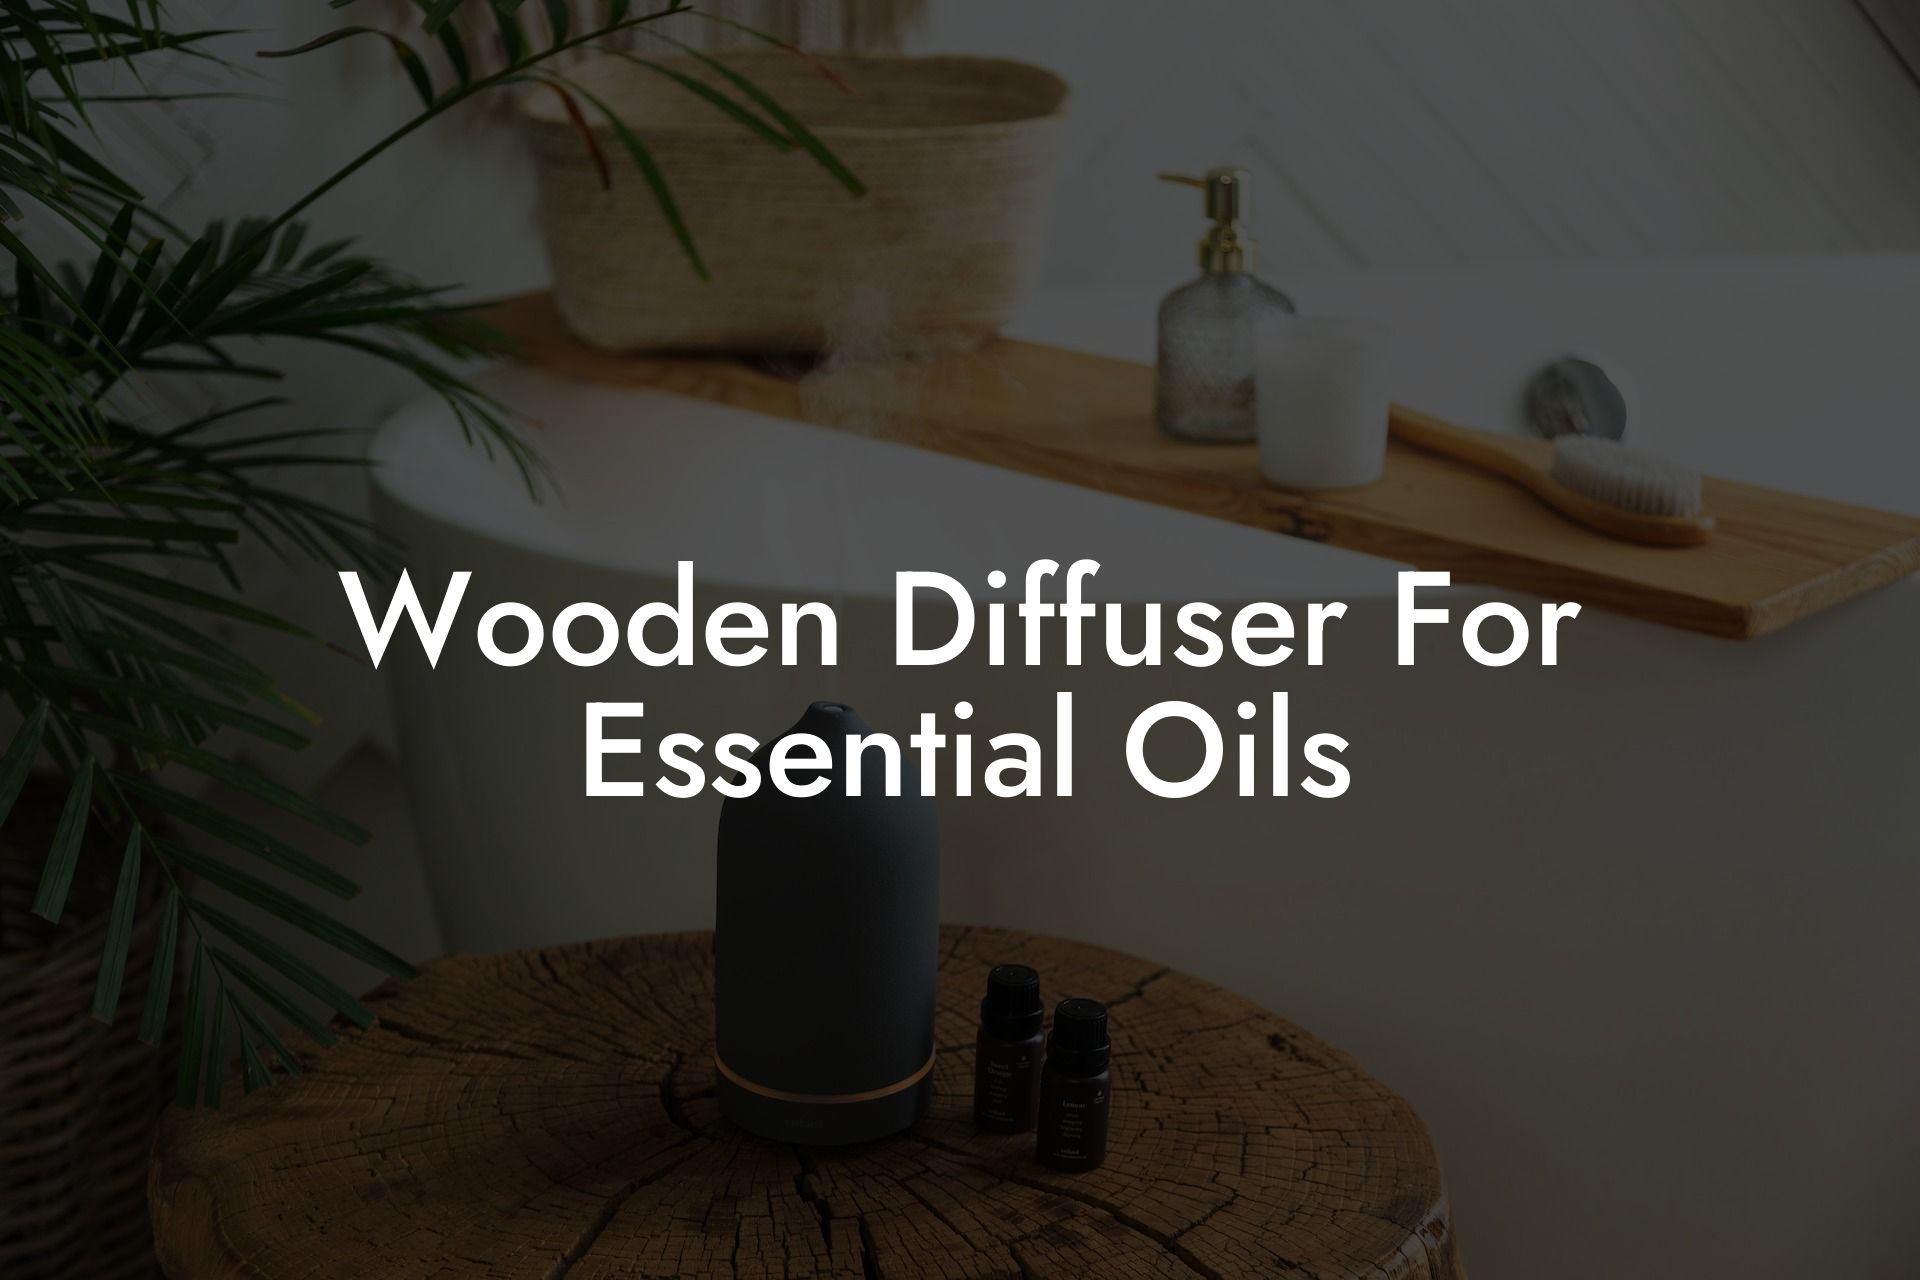 Wooden Diffuser For Essential Oils